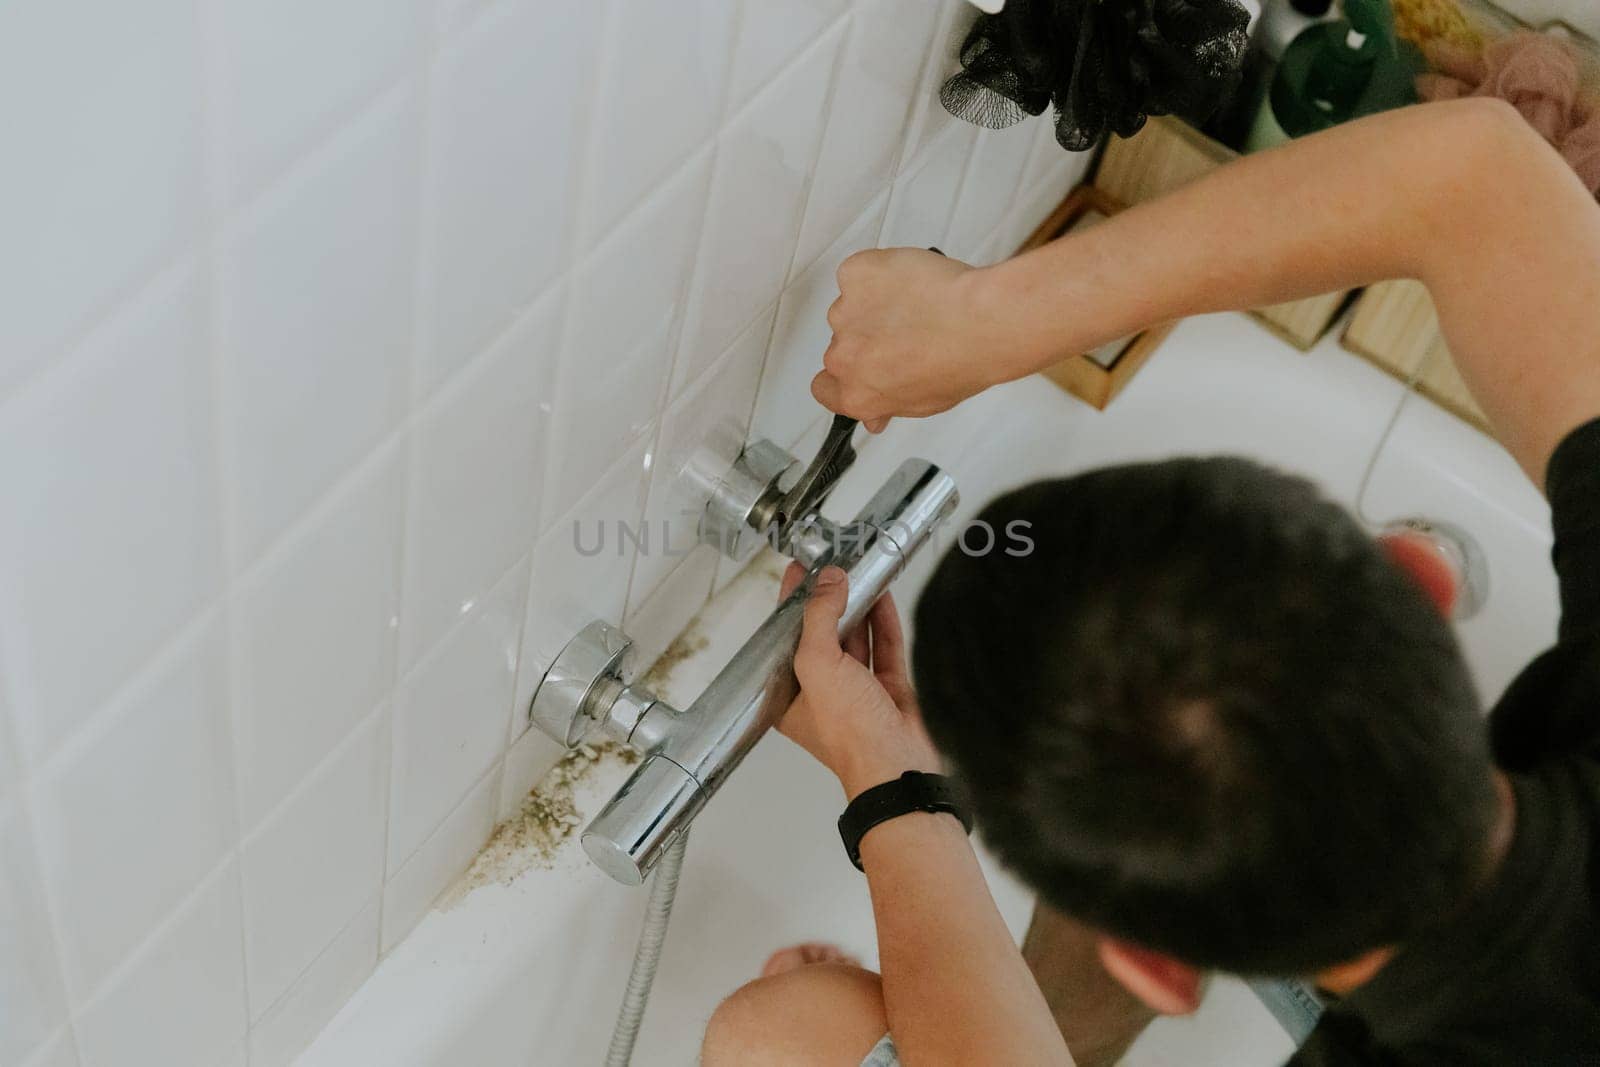 One young Caucasian brunette man manually tightens the nut on the faucet in the wall using an adjustable wrench while sitting on the edge of the bathtub, top view. Step by step.